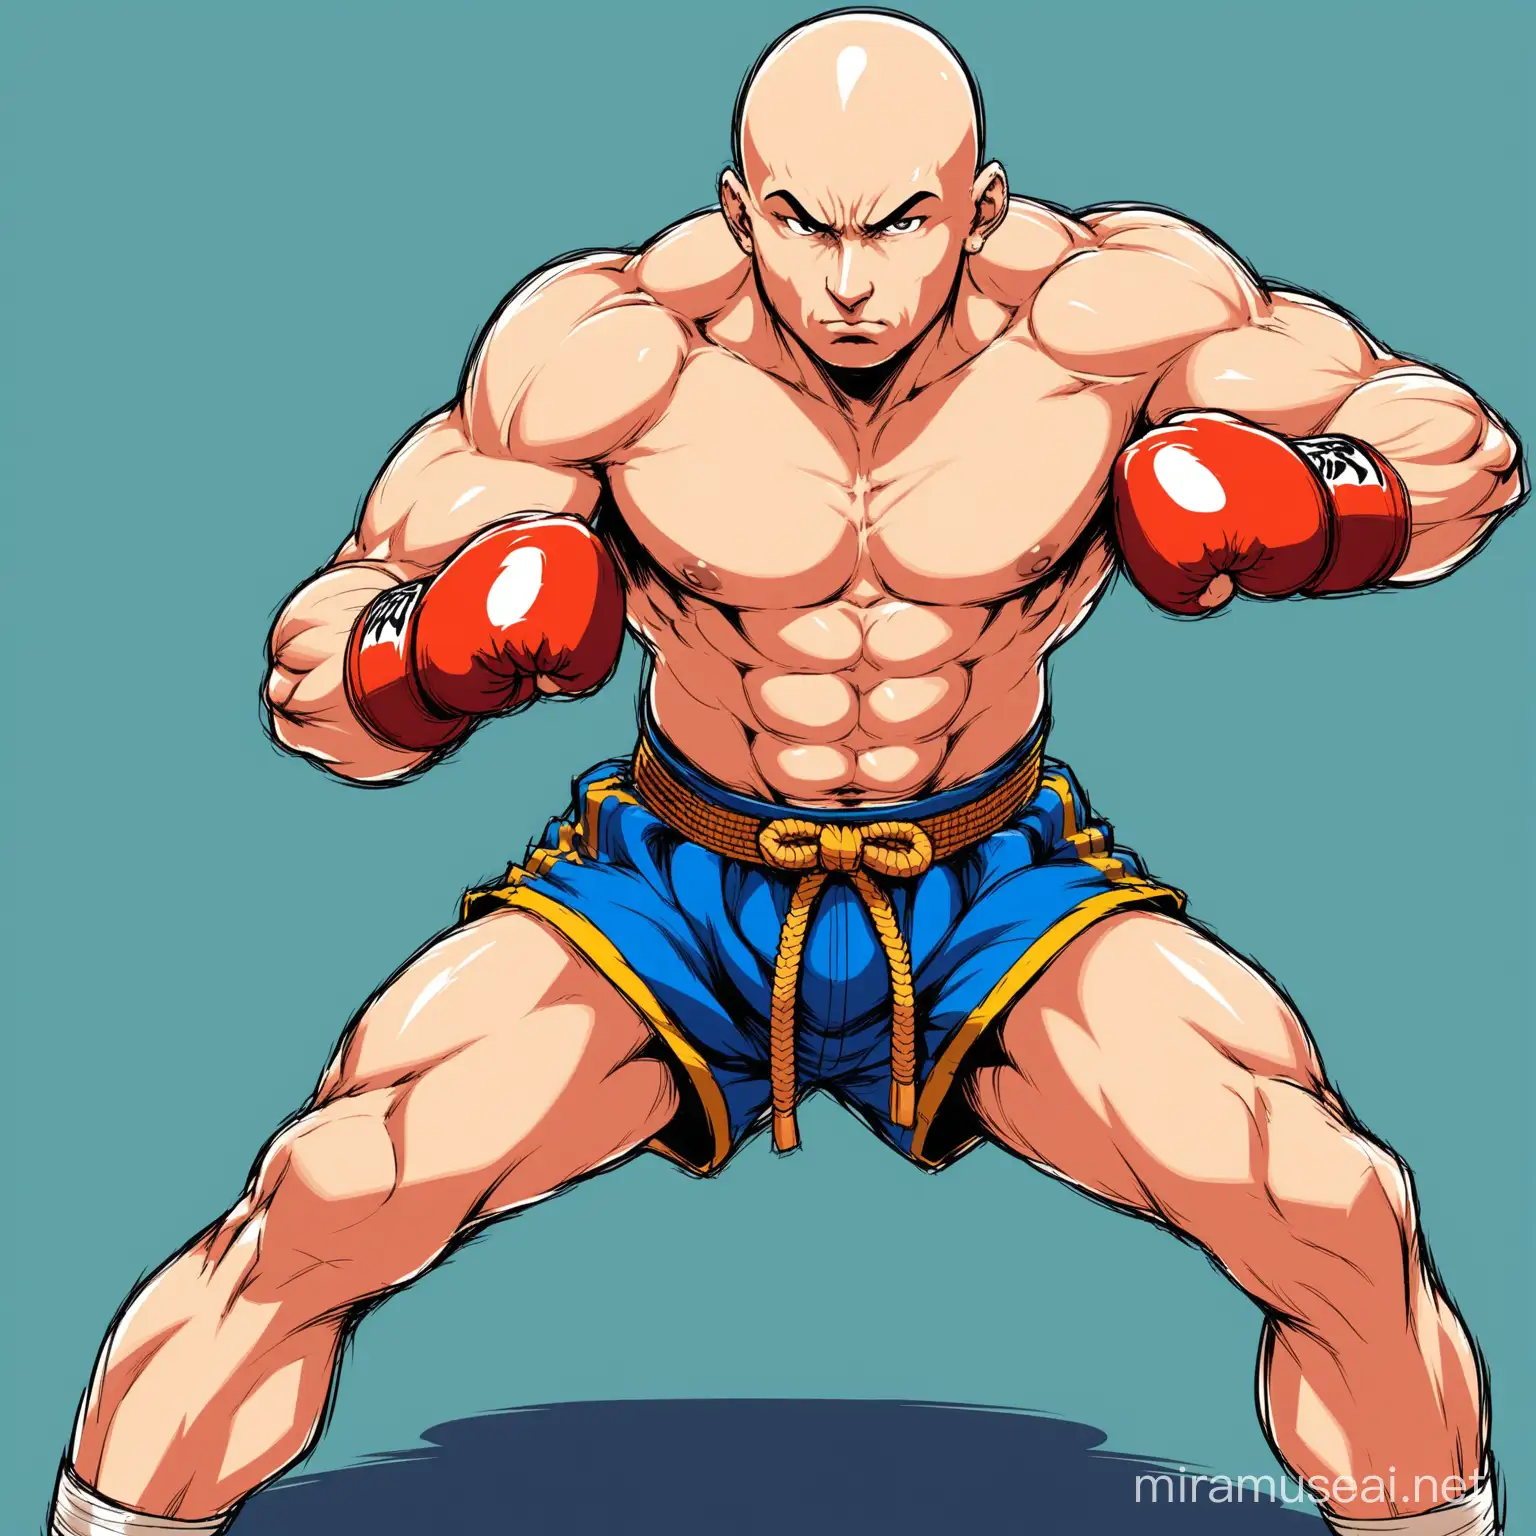 Bald Street Fighter Poses in Powerful Muay Thai Stance Vector Illustration